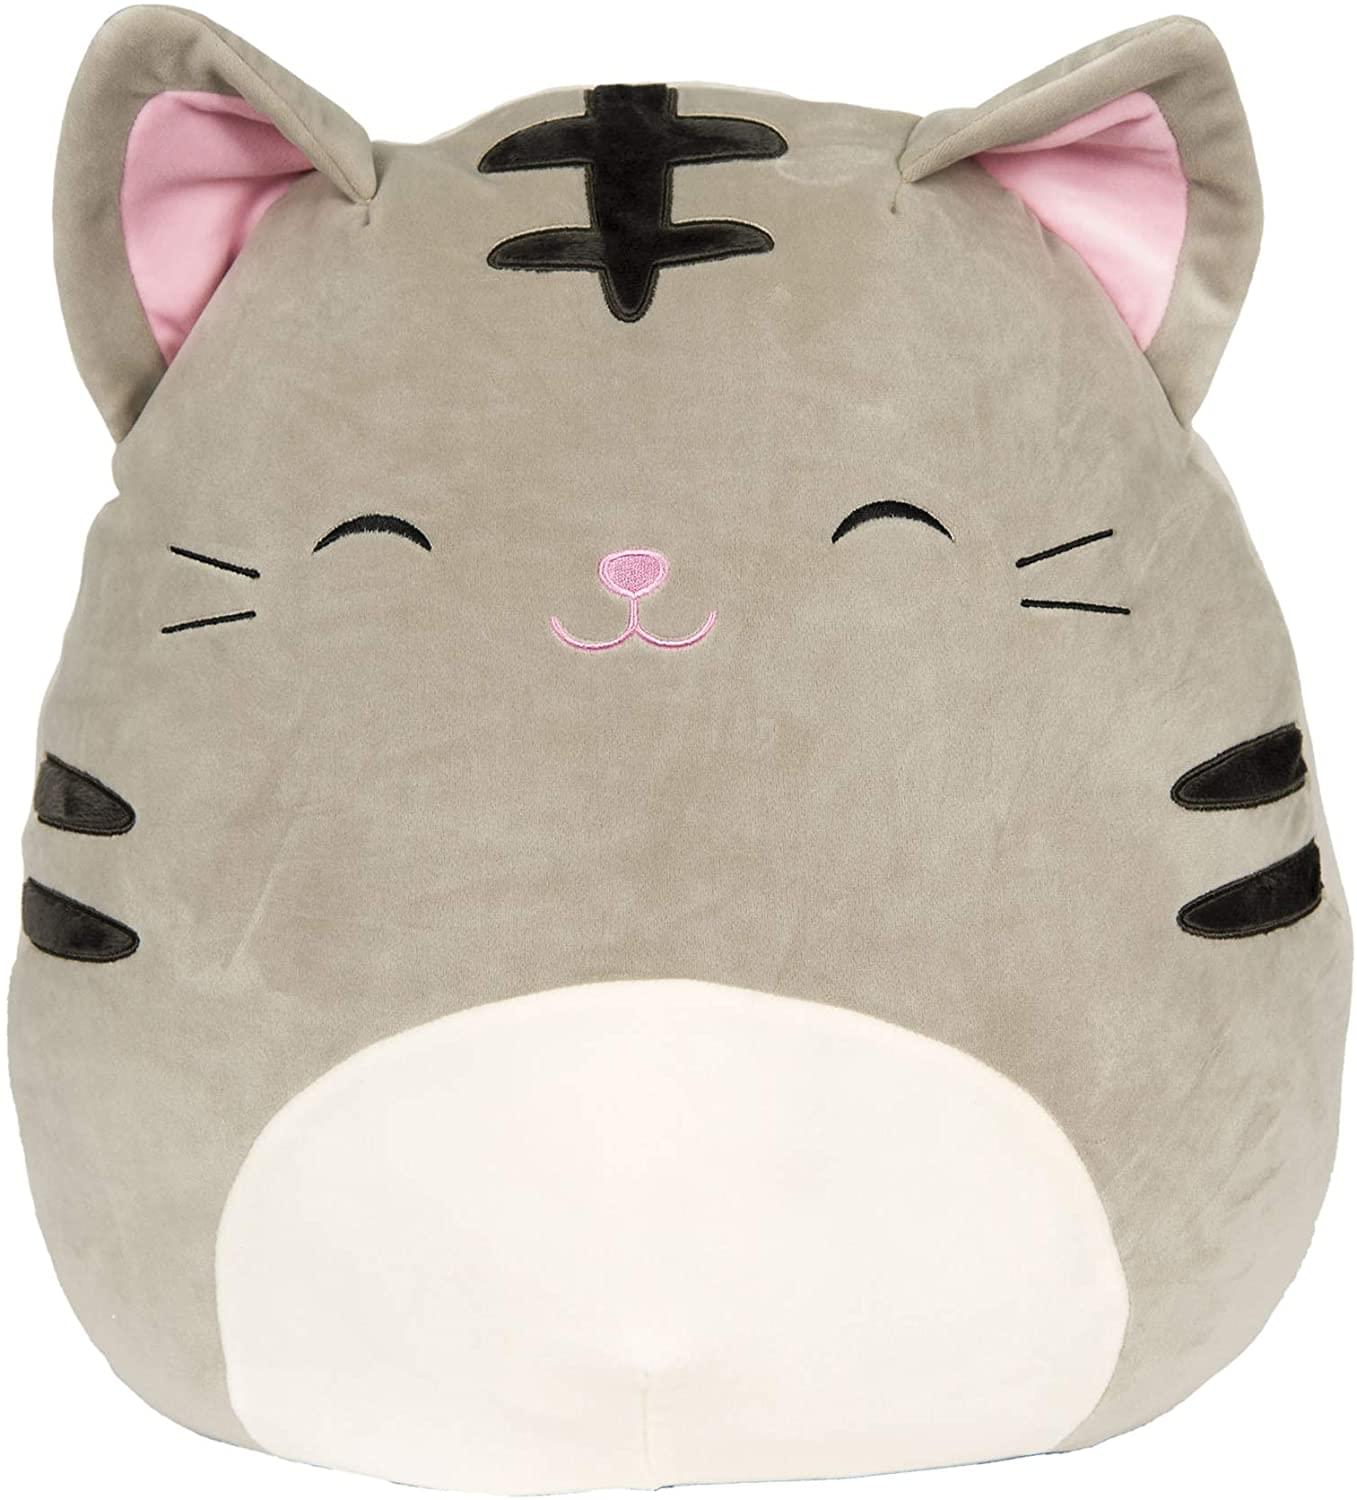 Squishmallow 8 Inch Plush | Tally the Grey Tabby Cat